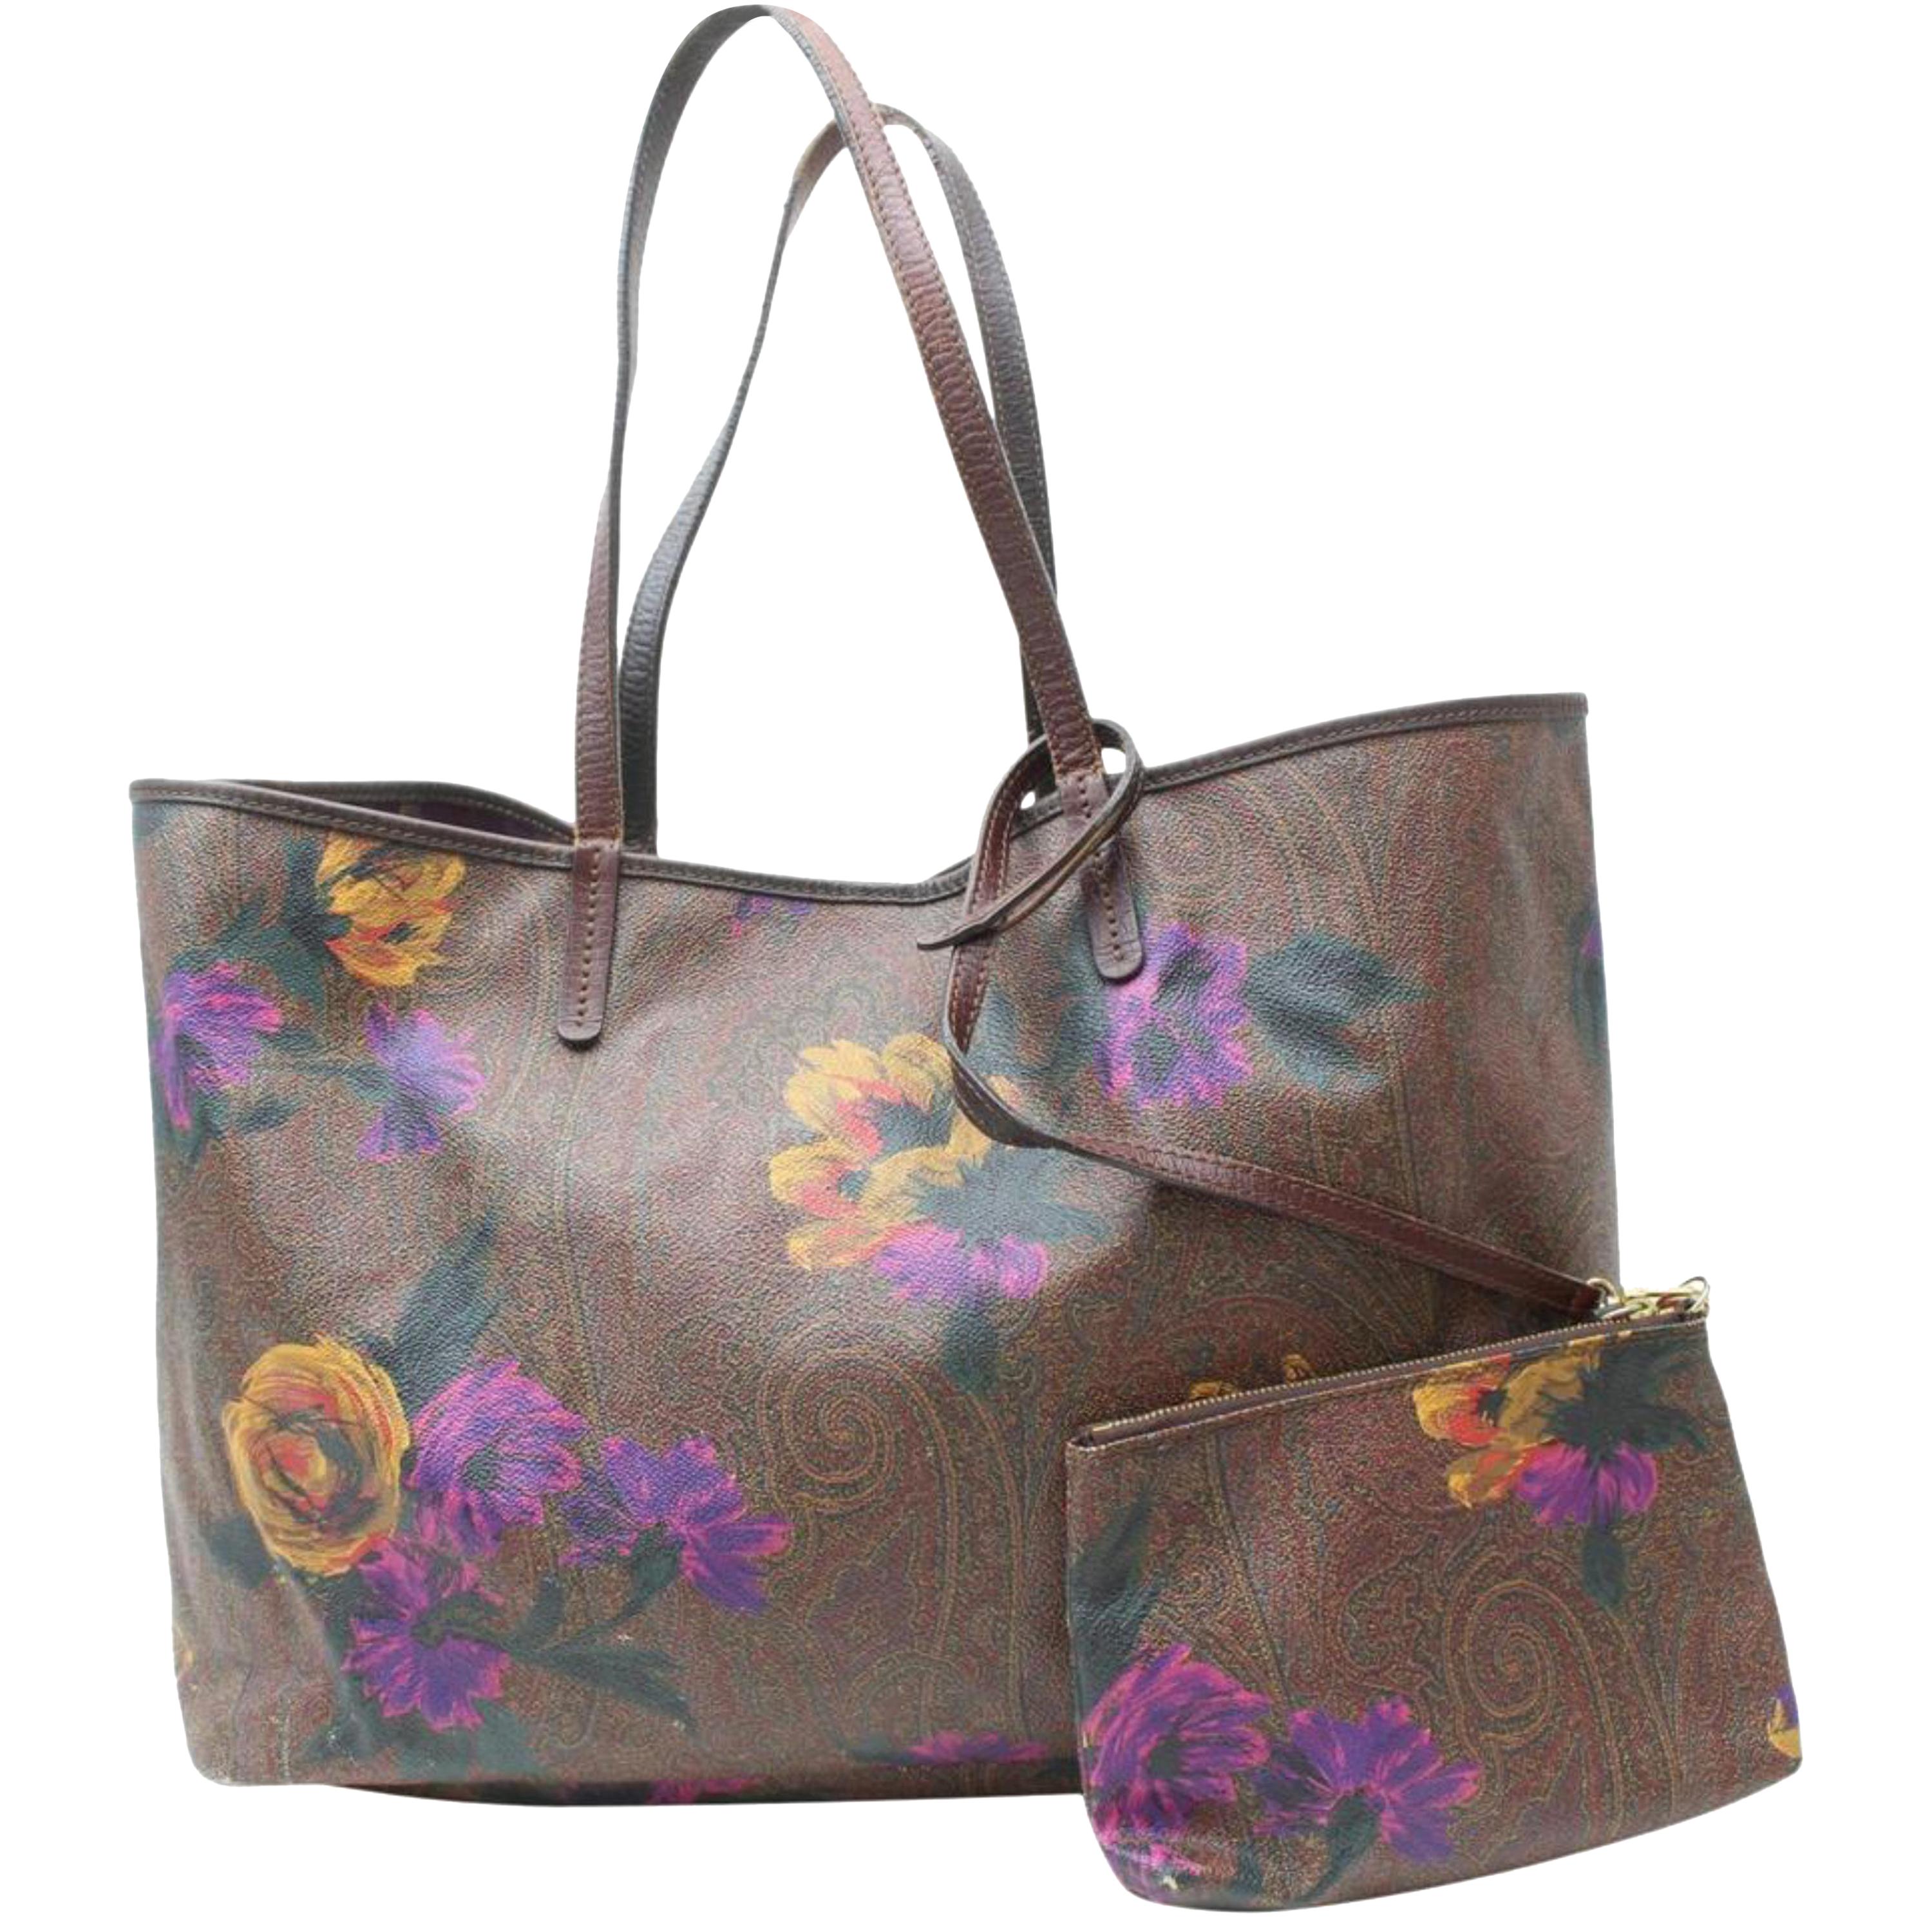 Etro Bordeaux Floral Paisley Tote with Pouch 869601 Burgundy Coated Shoulder Bag For Sale